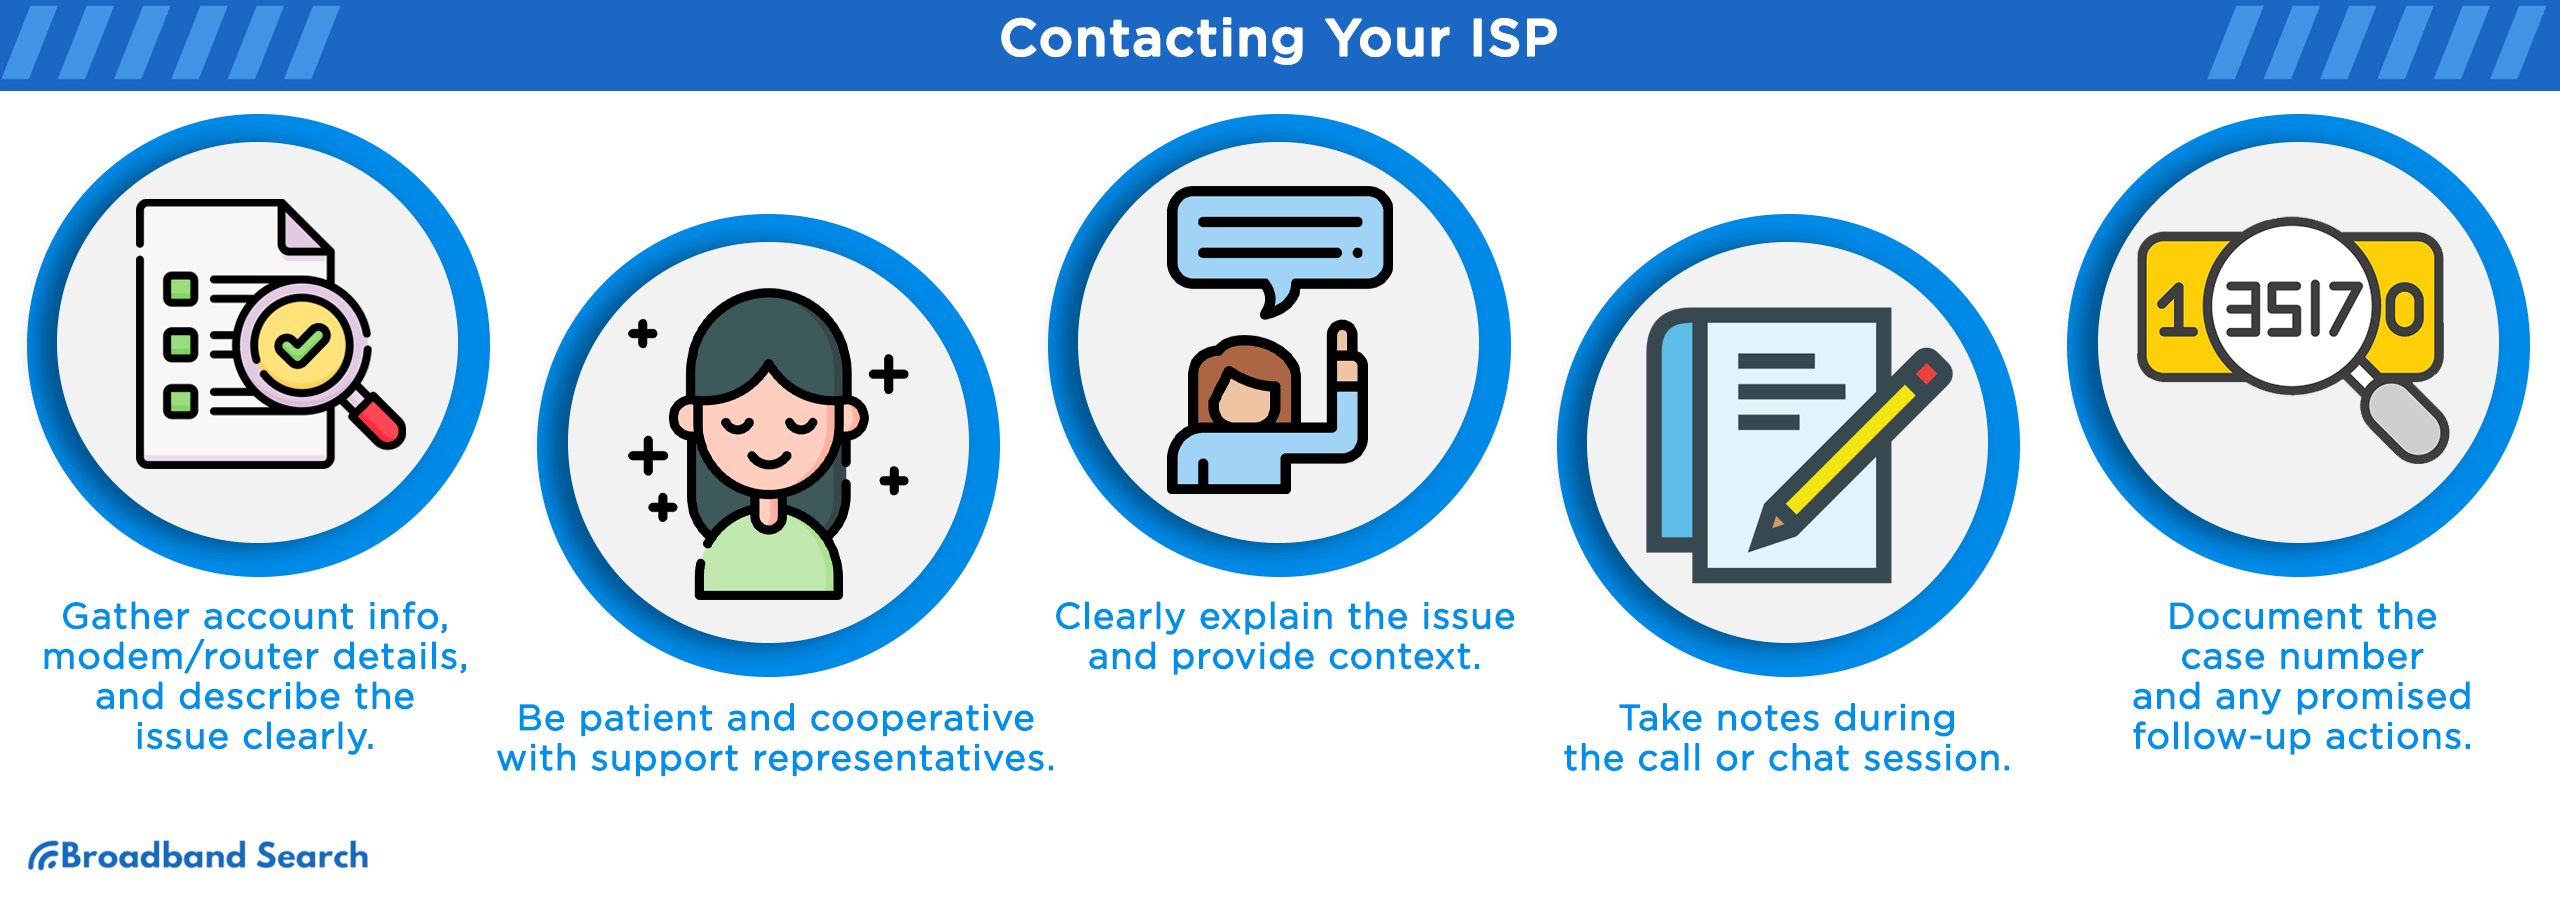 Contacting your isp